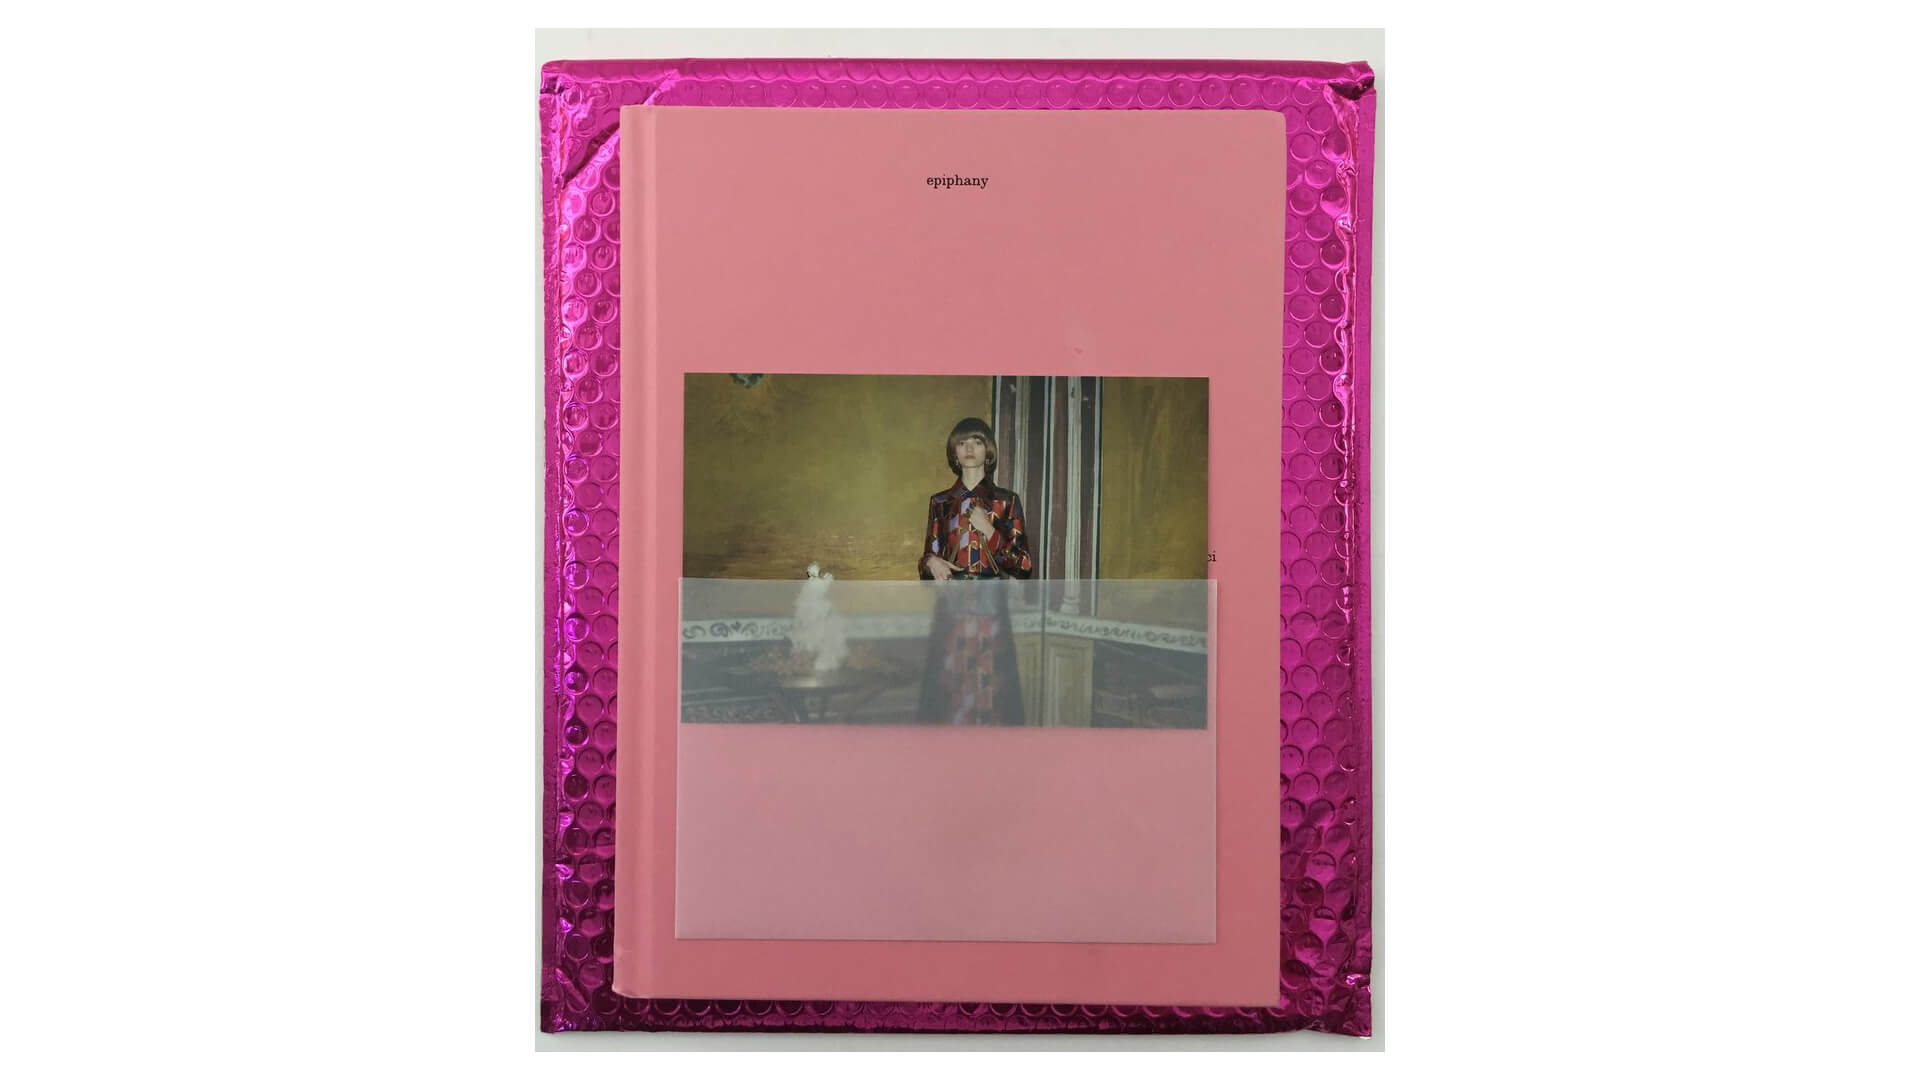 Gucci: Ari Marcopoulos' Epiphany Book 